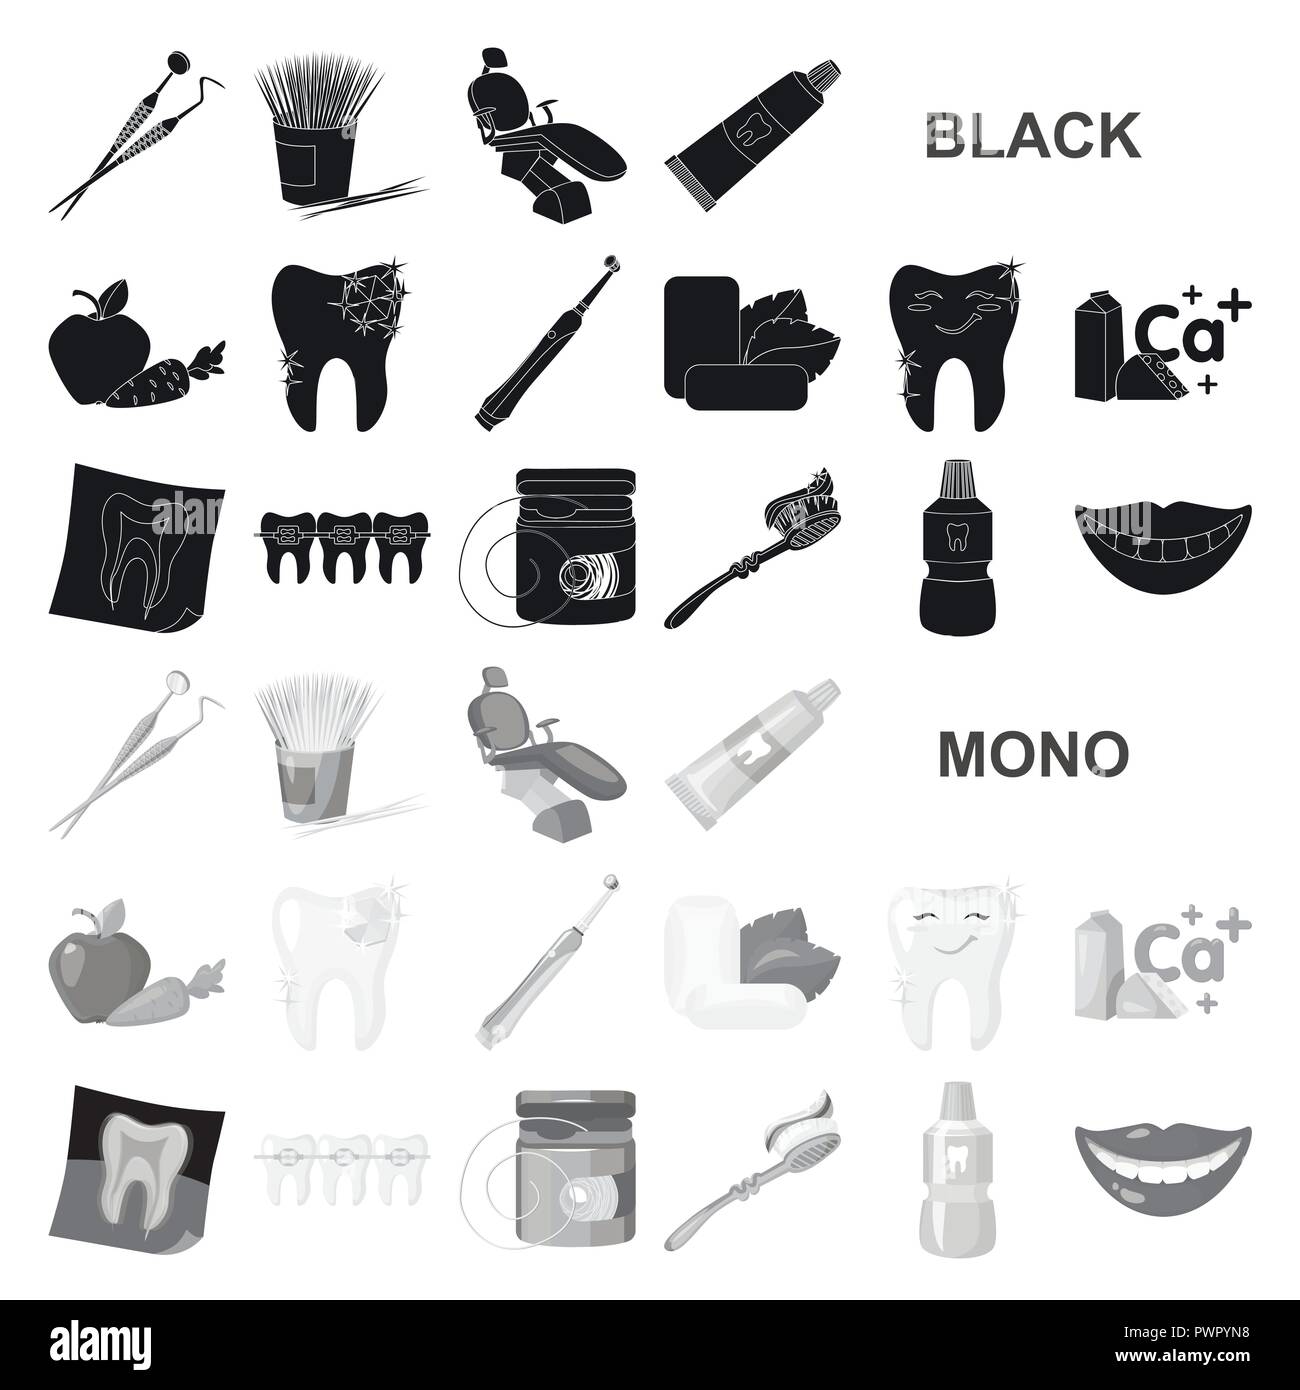 adaptation,apple,art,black,bottle,braces,calcium,care,carrot,chair,chewing,clinic,collection,dental,dentist,dentistry,design,diamond,doctor,electric,equipment,floss,gum,hygiene,icon,illustration,instrument,isolated,logo,medicine,mouthwash,ray,set,sign,smile,smiling,sources,symbol,teeth,tooth,toothbrush,toothpaste,toothpick,treatment,vector,web,white,x Vector Vectors , Stock Vector